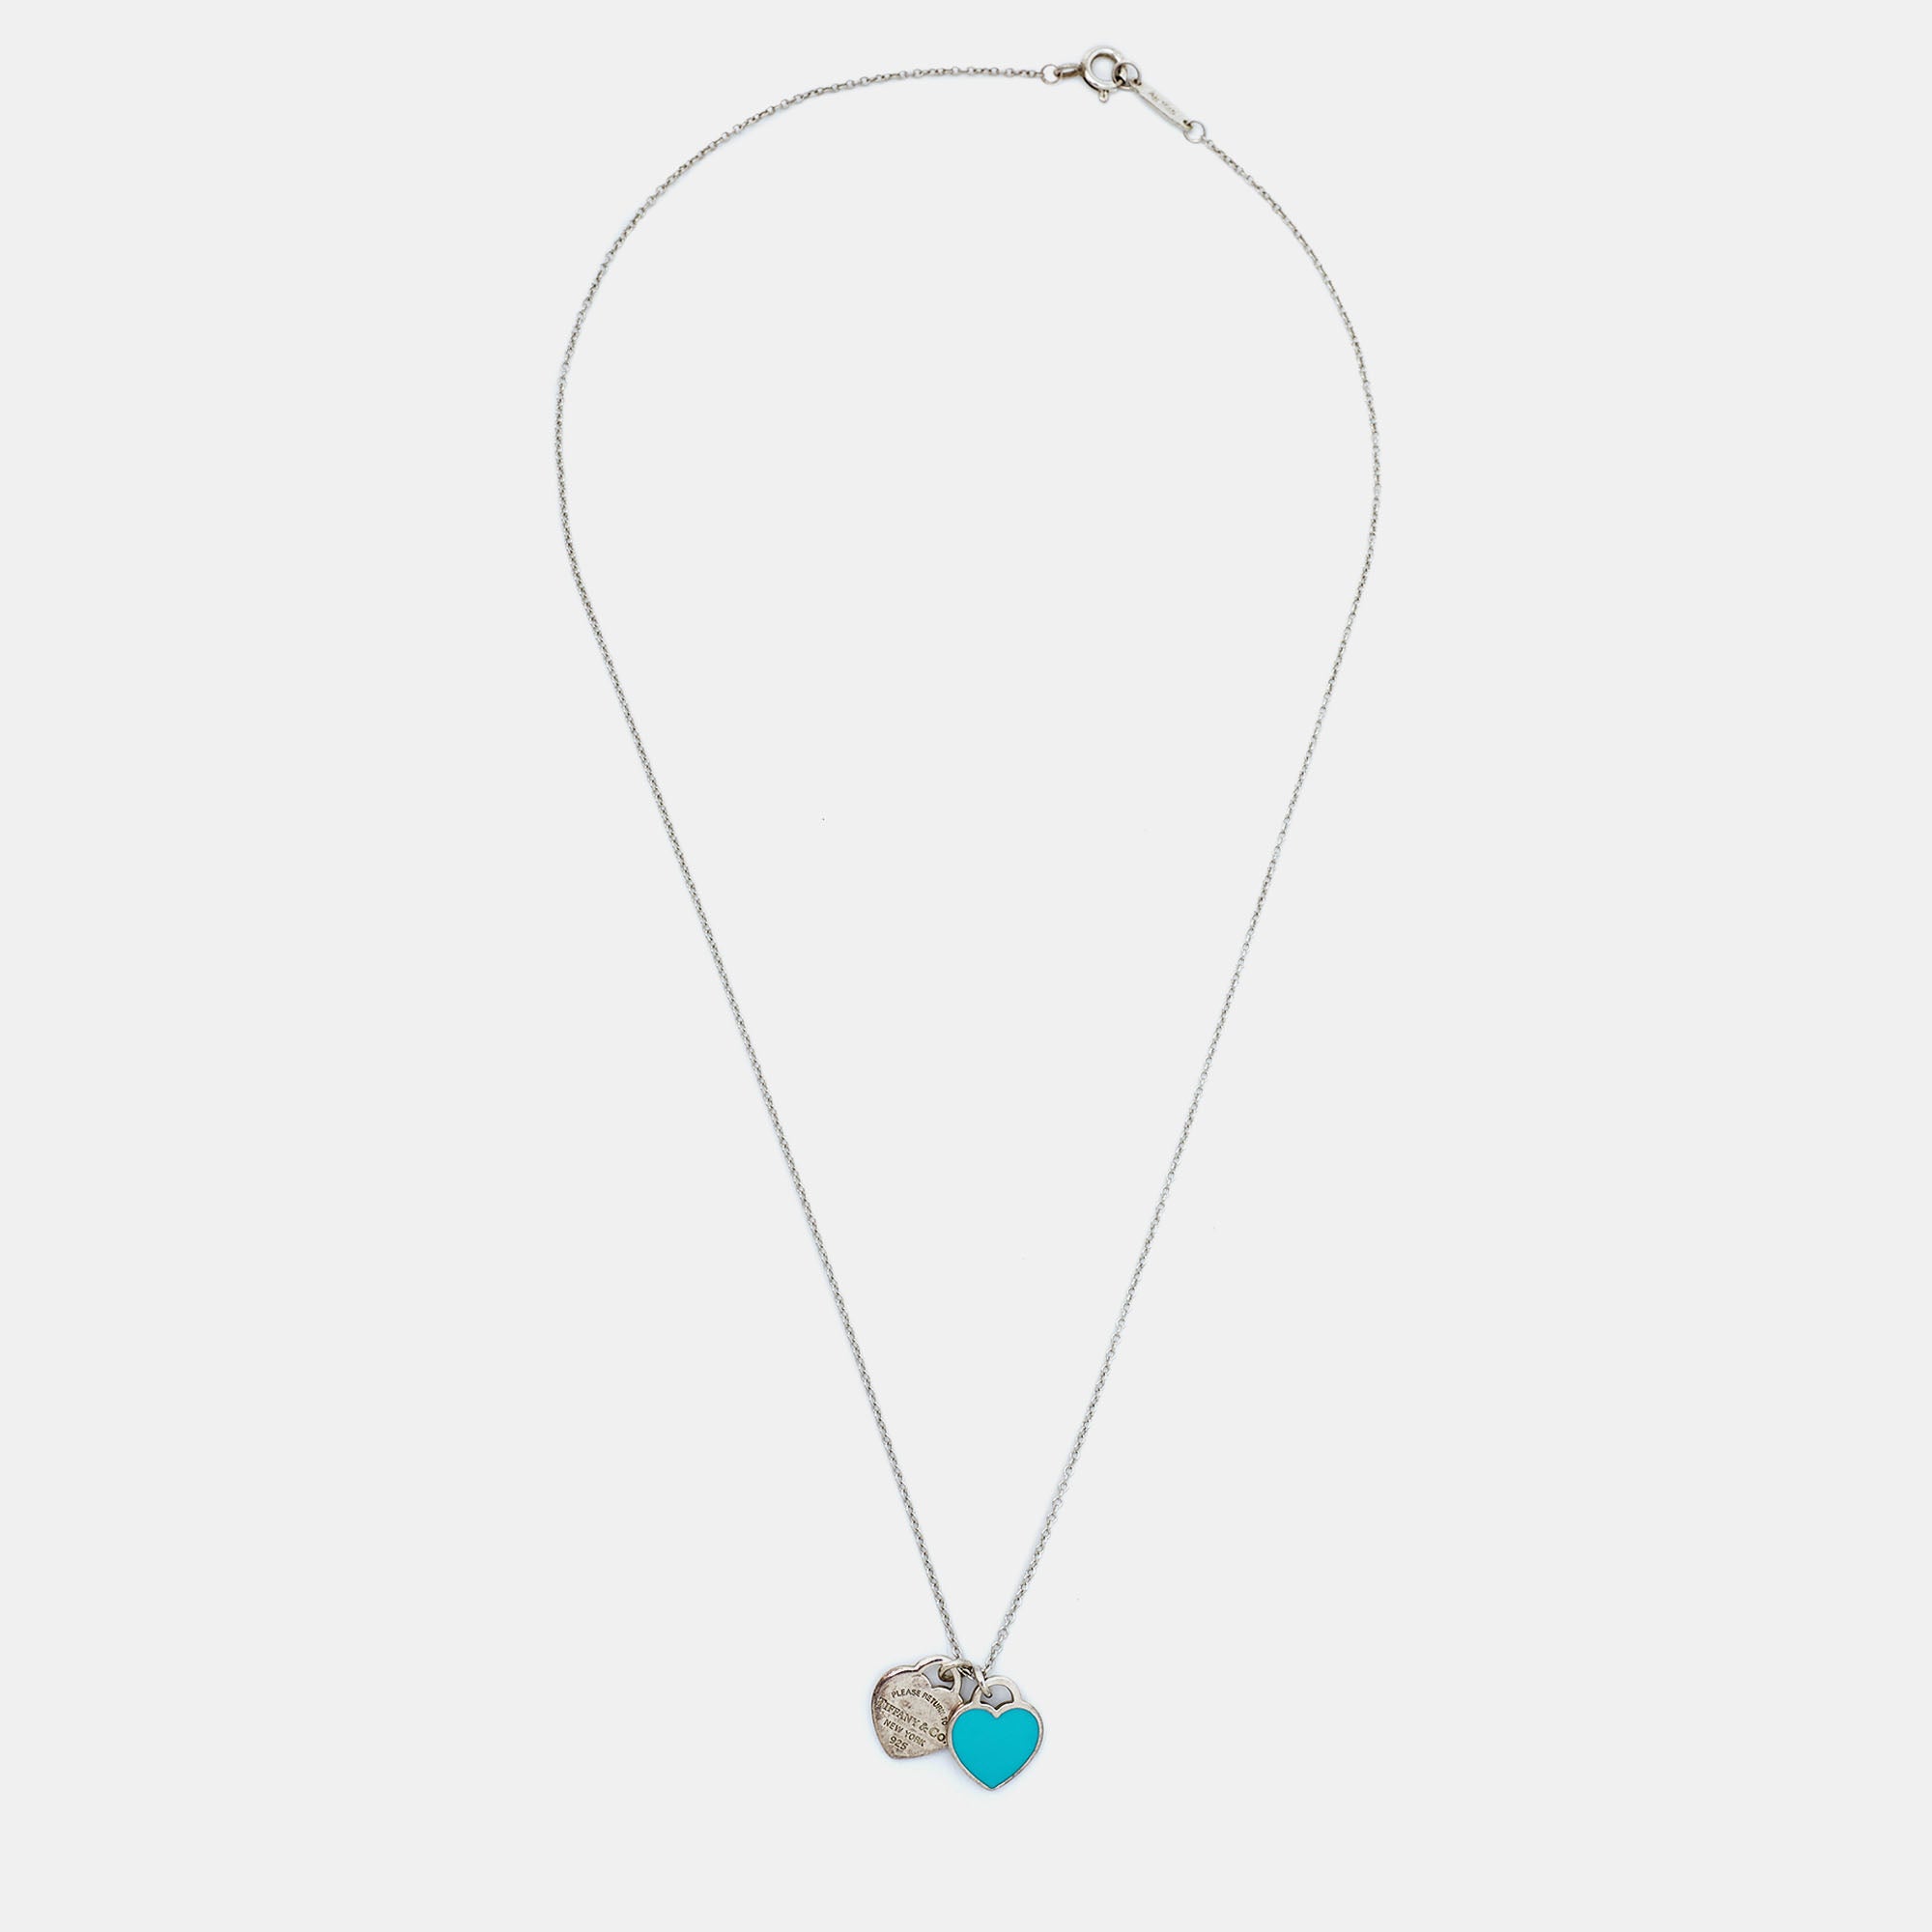 Poppy Vintage Silver Short Pendant Necklace in Variegated Turquoise  Magnesite | Kendra Scott